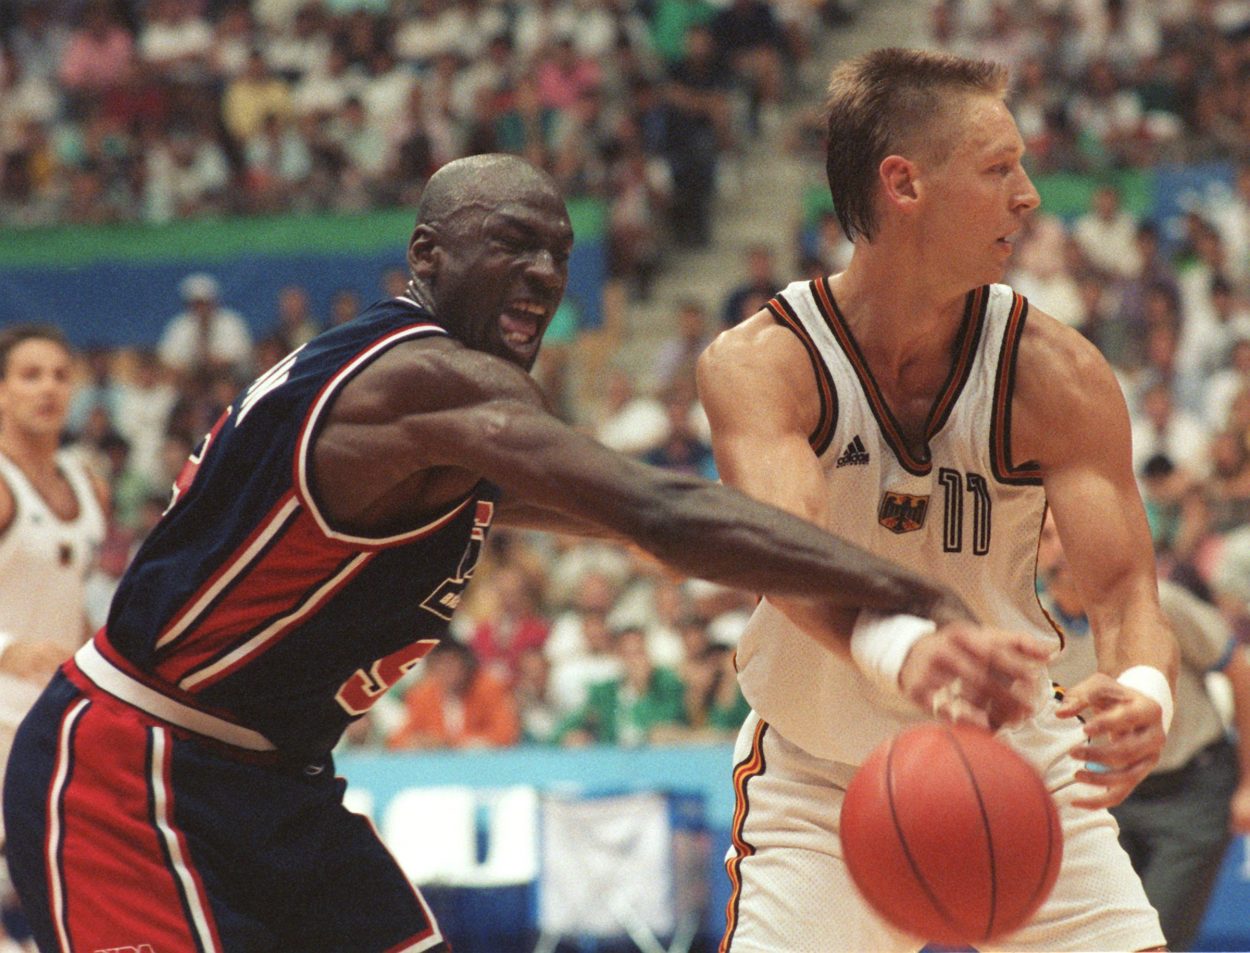 Former Bulls star Michael Jordan makes a play on Detlef Schrempf during the 1992 Olympics